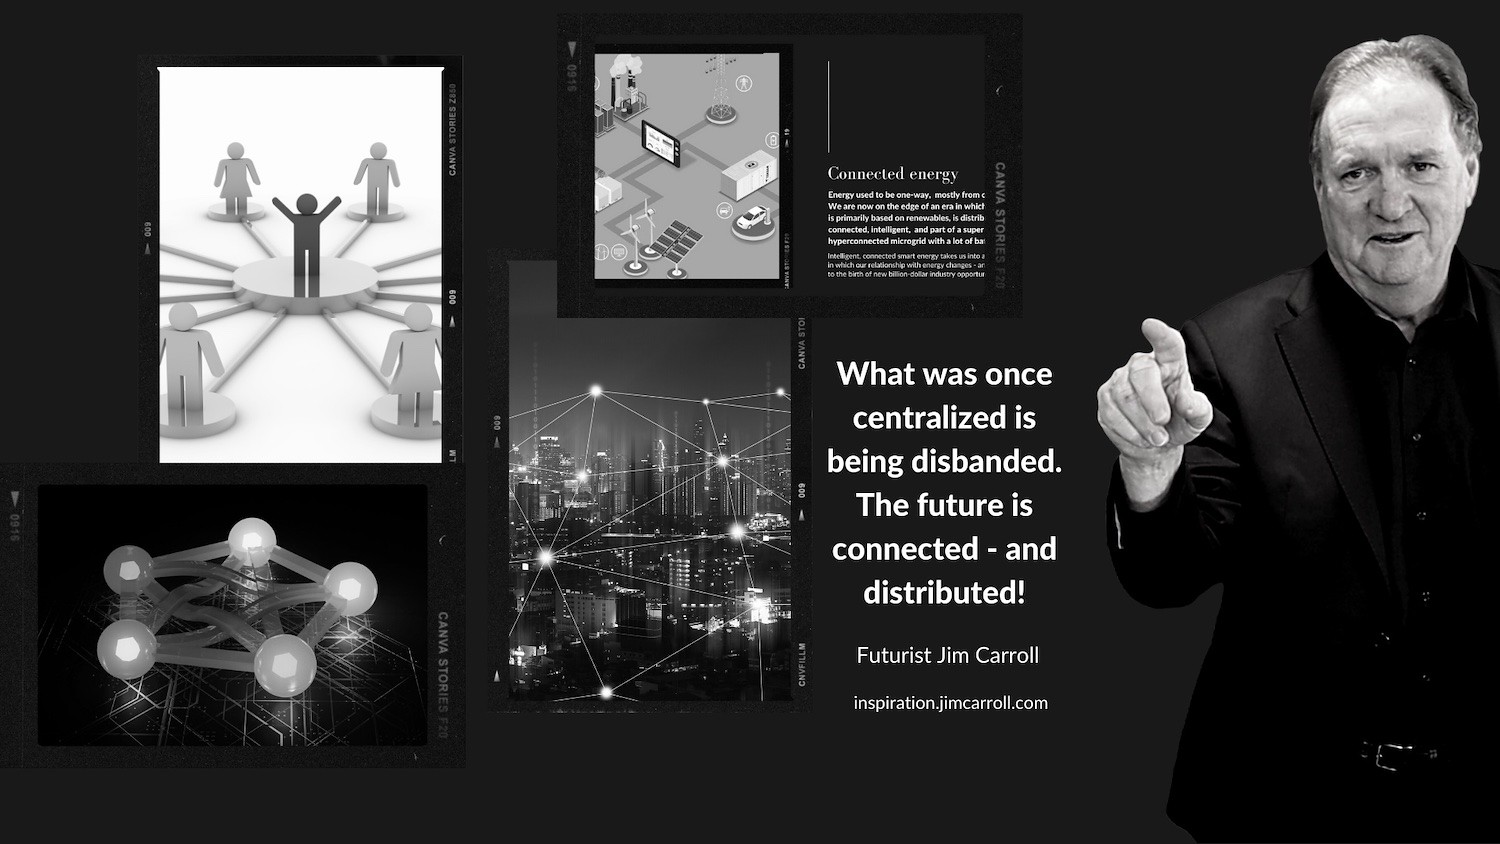 "What was once centralized is being disbanded. The future is connected - and distributed!" - Futurist Jim Carroll